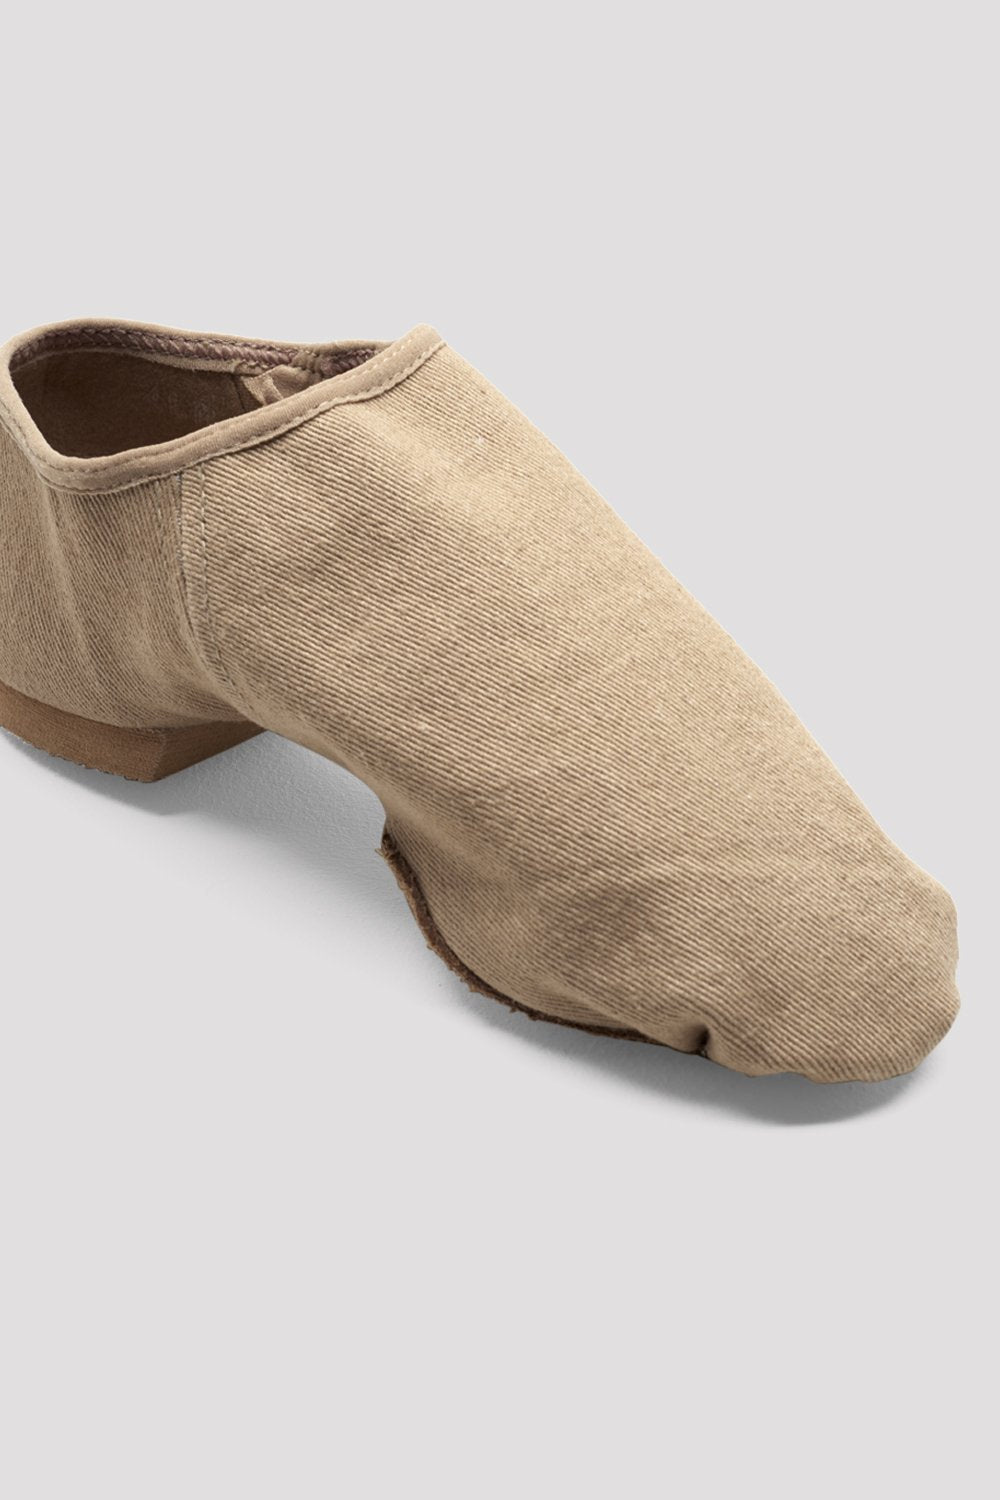 bloch canvas jazz shoes